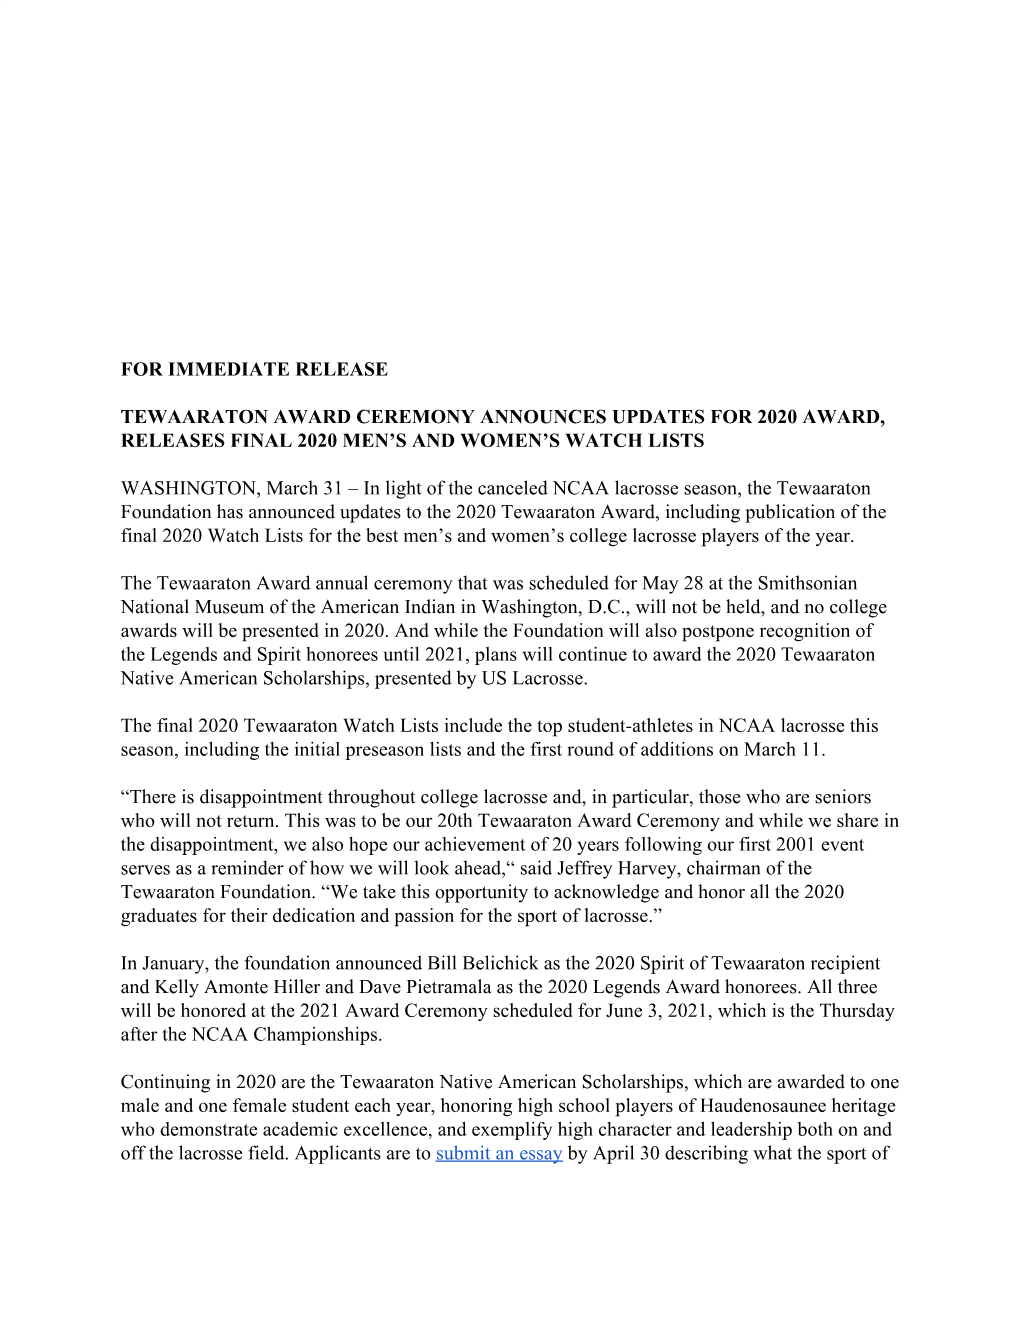 For Immediate Release Tewaaraton Award Ceremony Announces Updates for 2020 Award, Releases Final 2020 Men's and Women's Watc